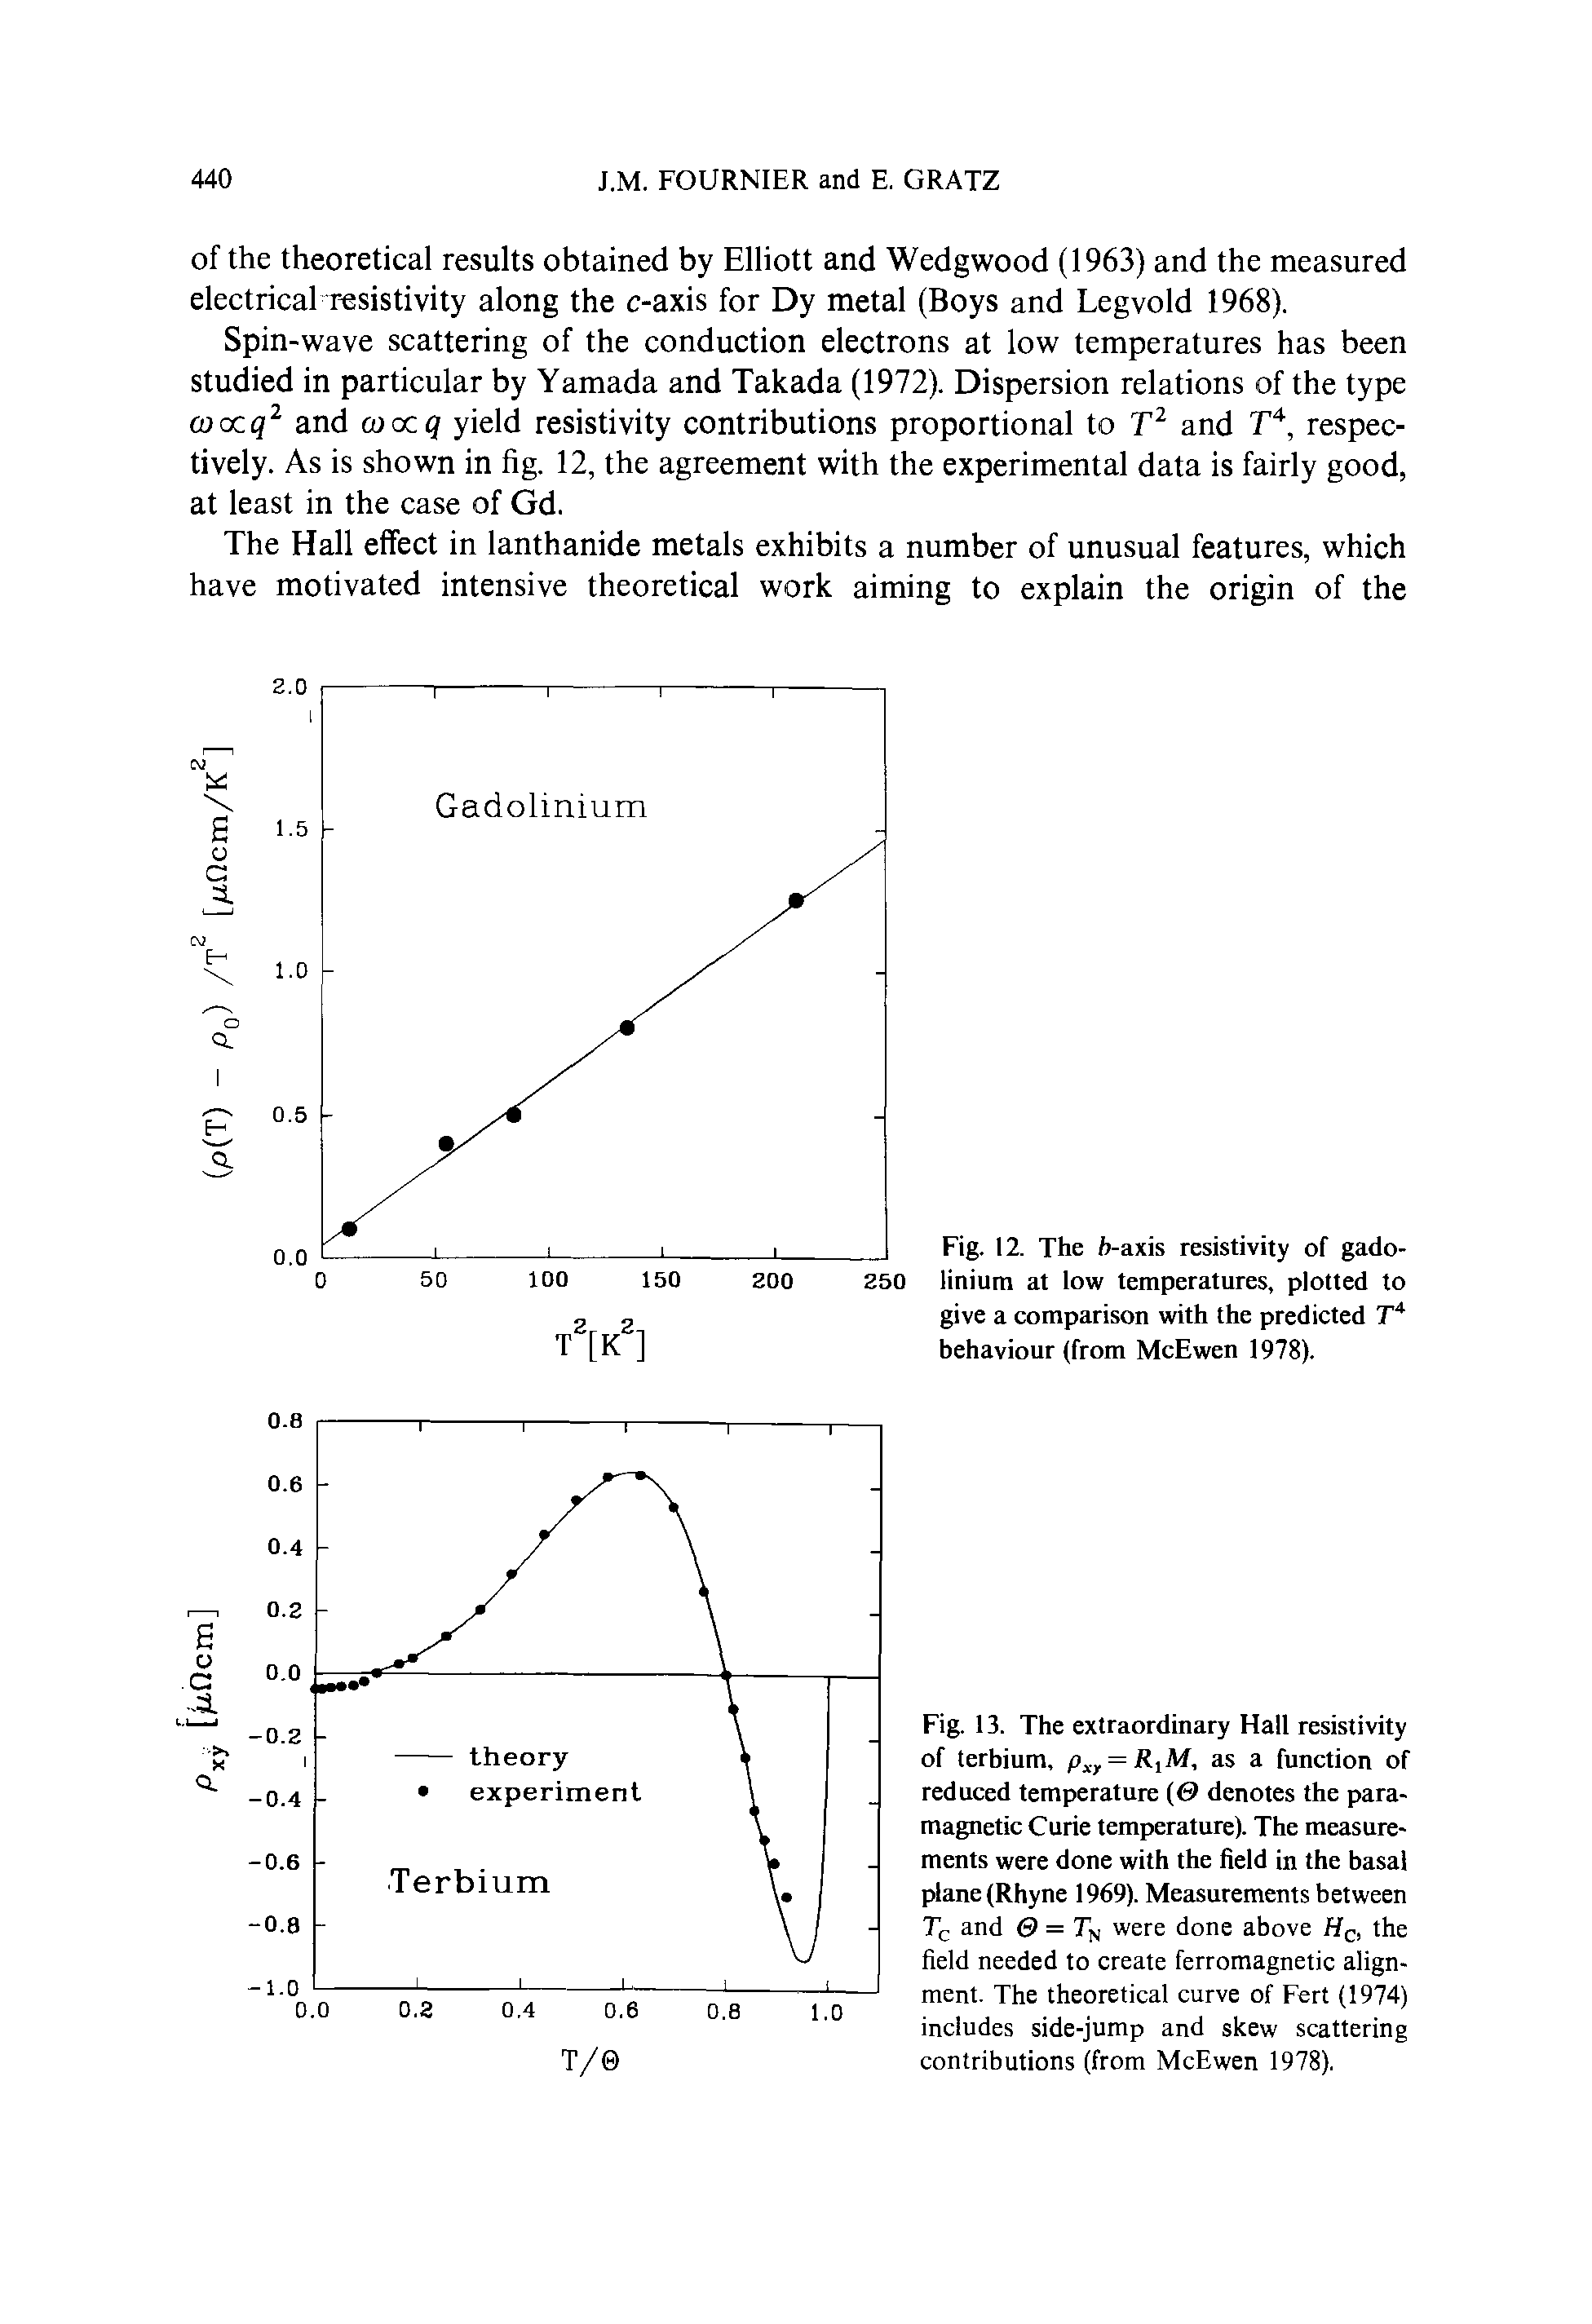 Fig. 13. The extraordinary Hall resistivity of terbium, p, = R,M, as a function of reduced temperature denotes the paramagnetic Curie temperature). The measurements were done with the field in the basal plane (Rhyne 1969). Measurements between Tc and 0 = Ty were done above He, the field needed to create ferromagnetic alignment. The theoretical curve of Fert (1974) includes side-jump and skew scattering contributions (from McEwen 1978).